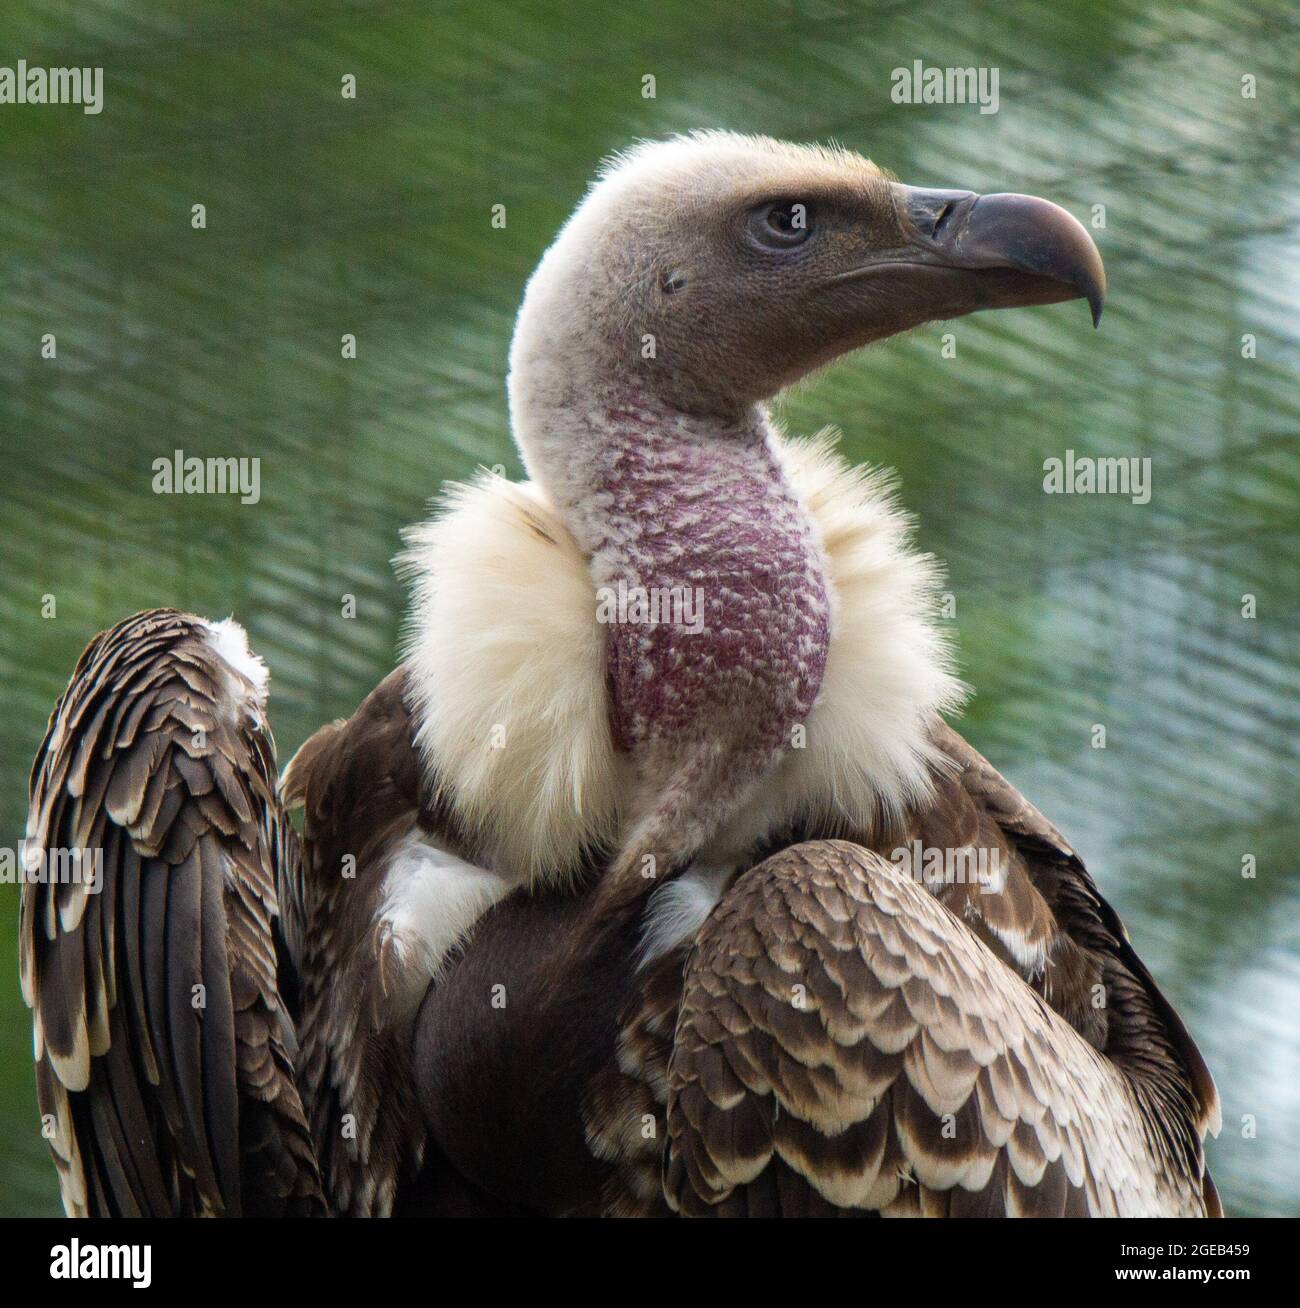 Large Raptor High Resolution Stock Photography and Images - Alamy